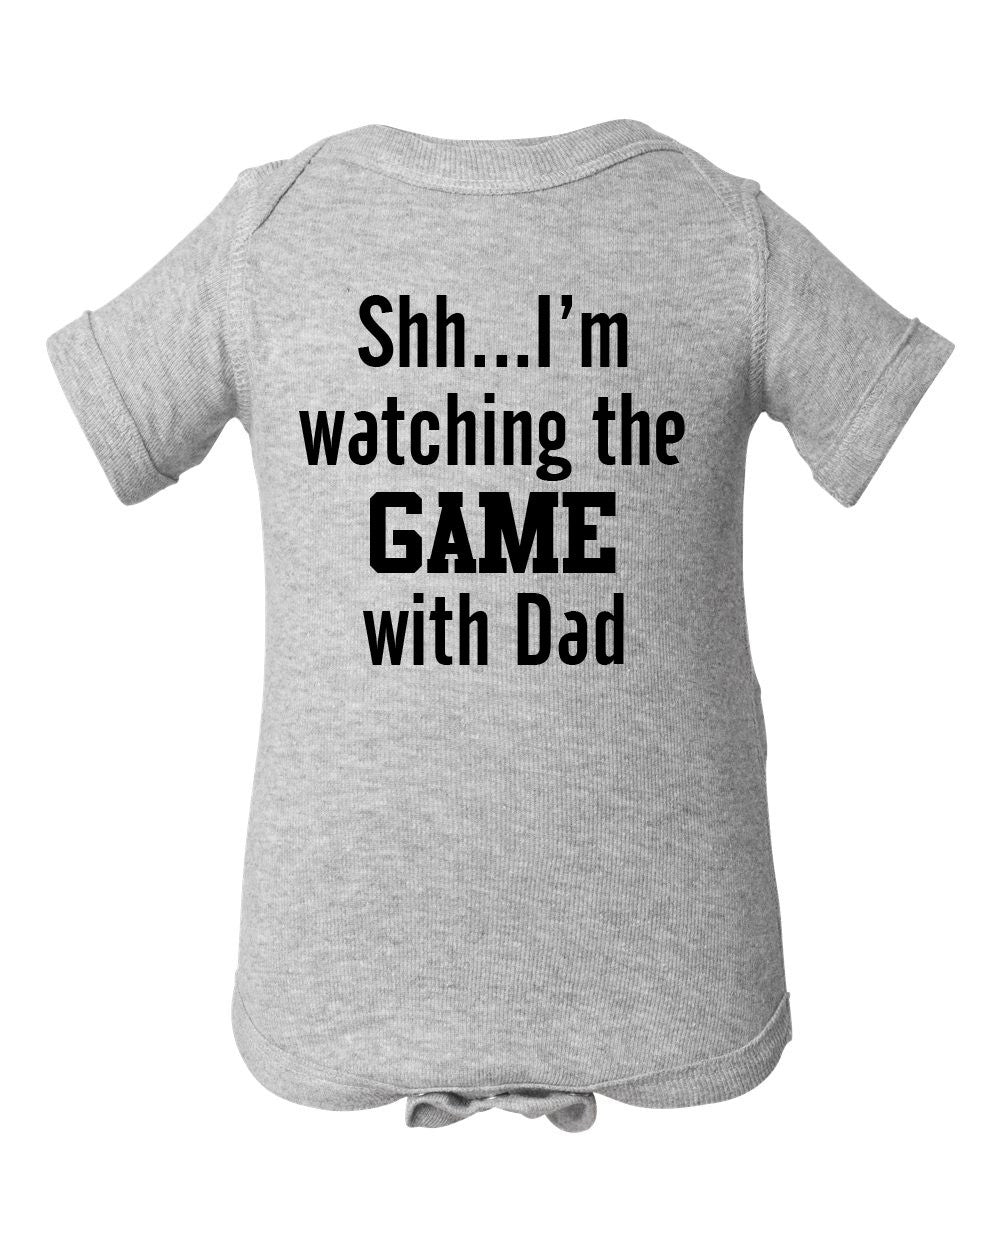 Watching With Daddy St Louis Cardinals Kids Toddler T-Shirt